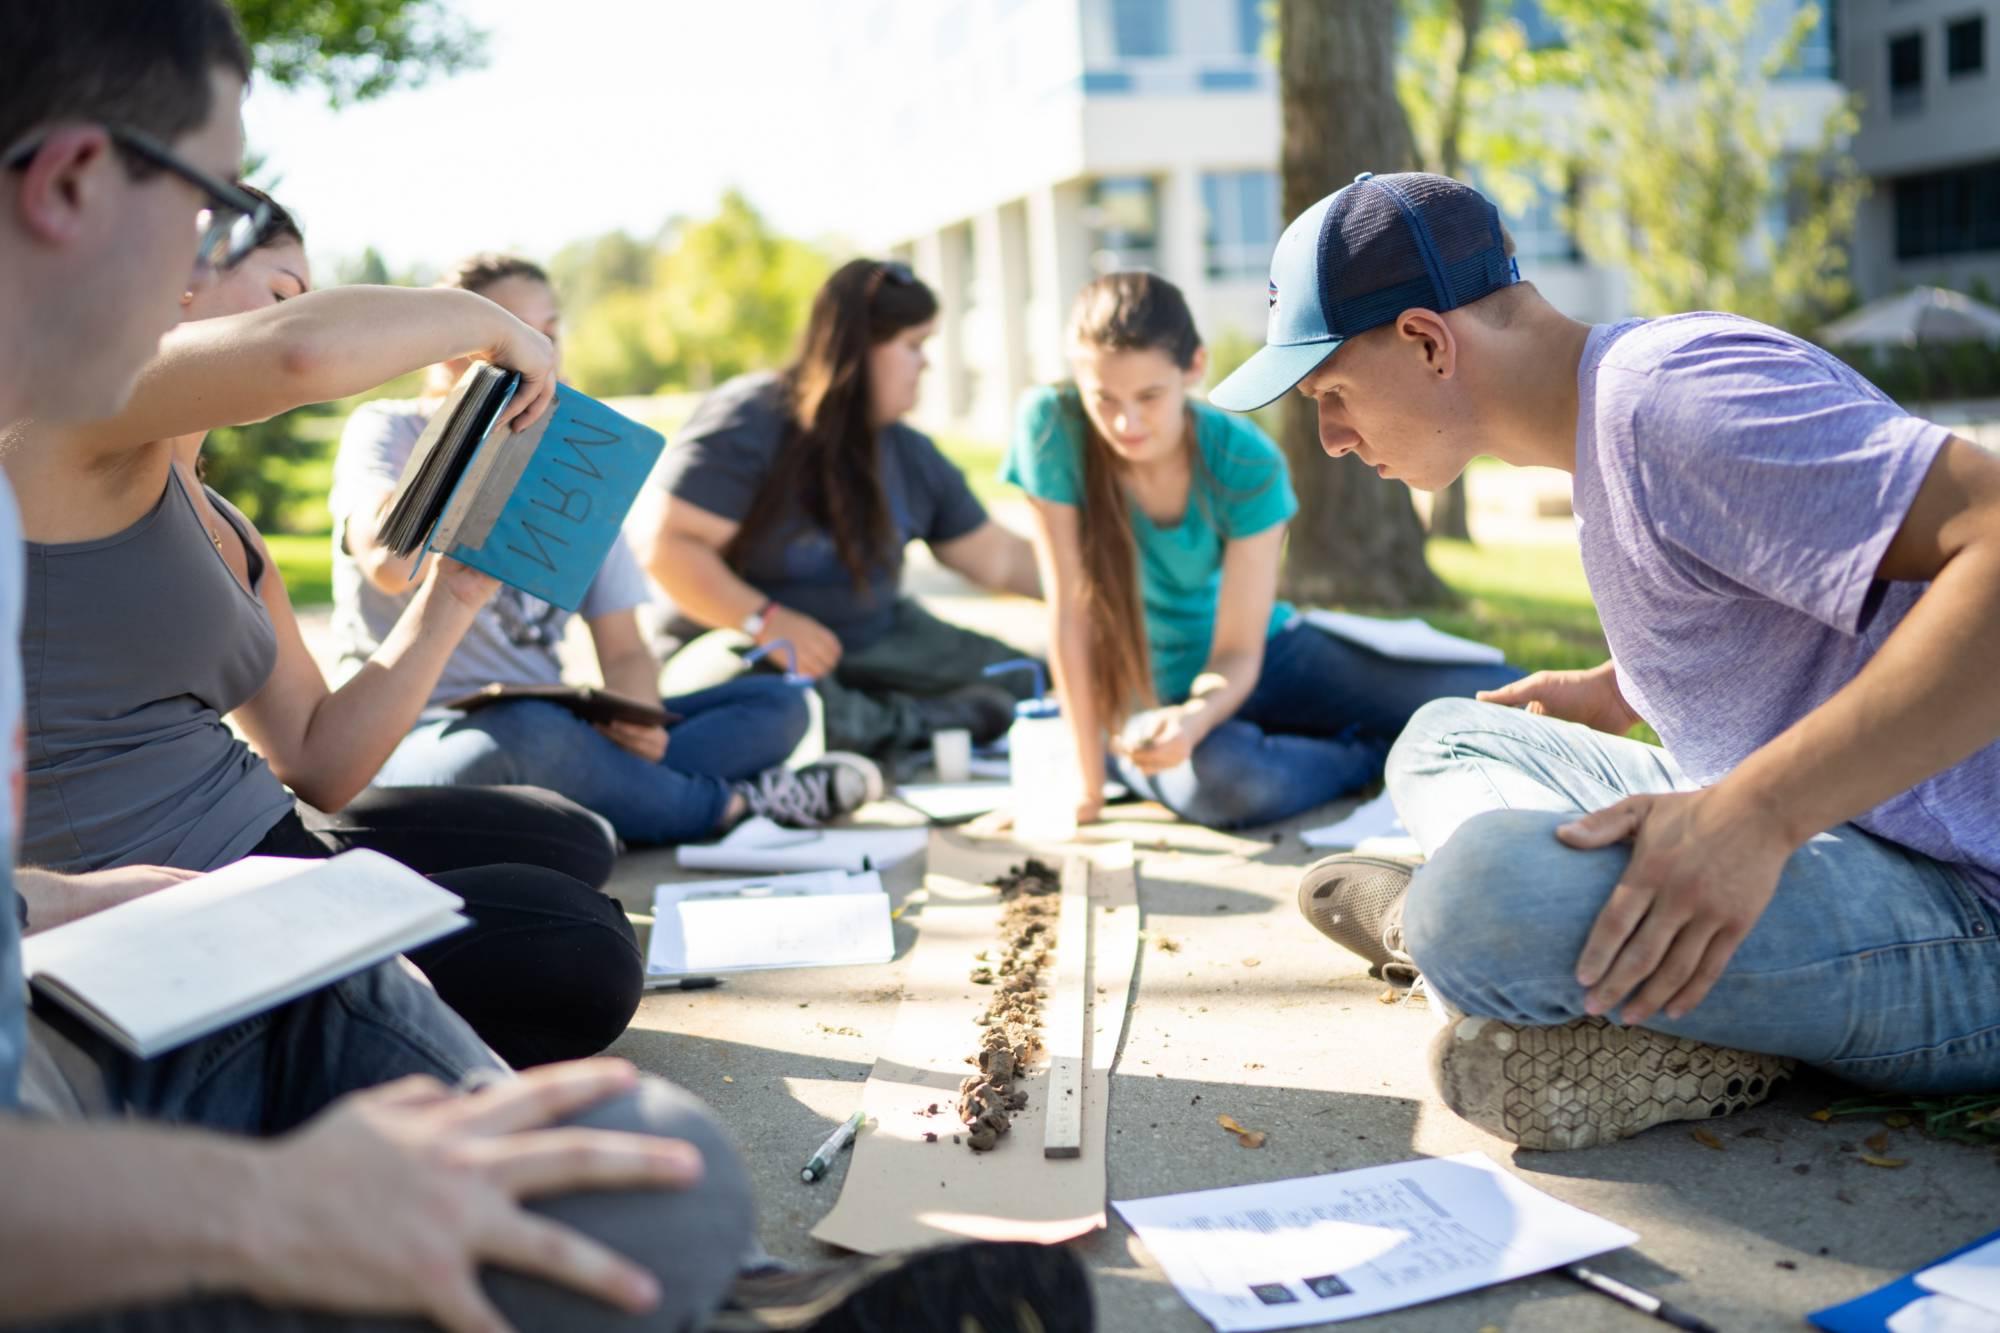 Students sitting on the ground outside gathered around a soil sample and analyzing it